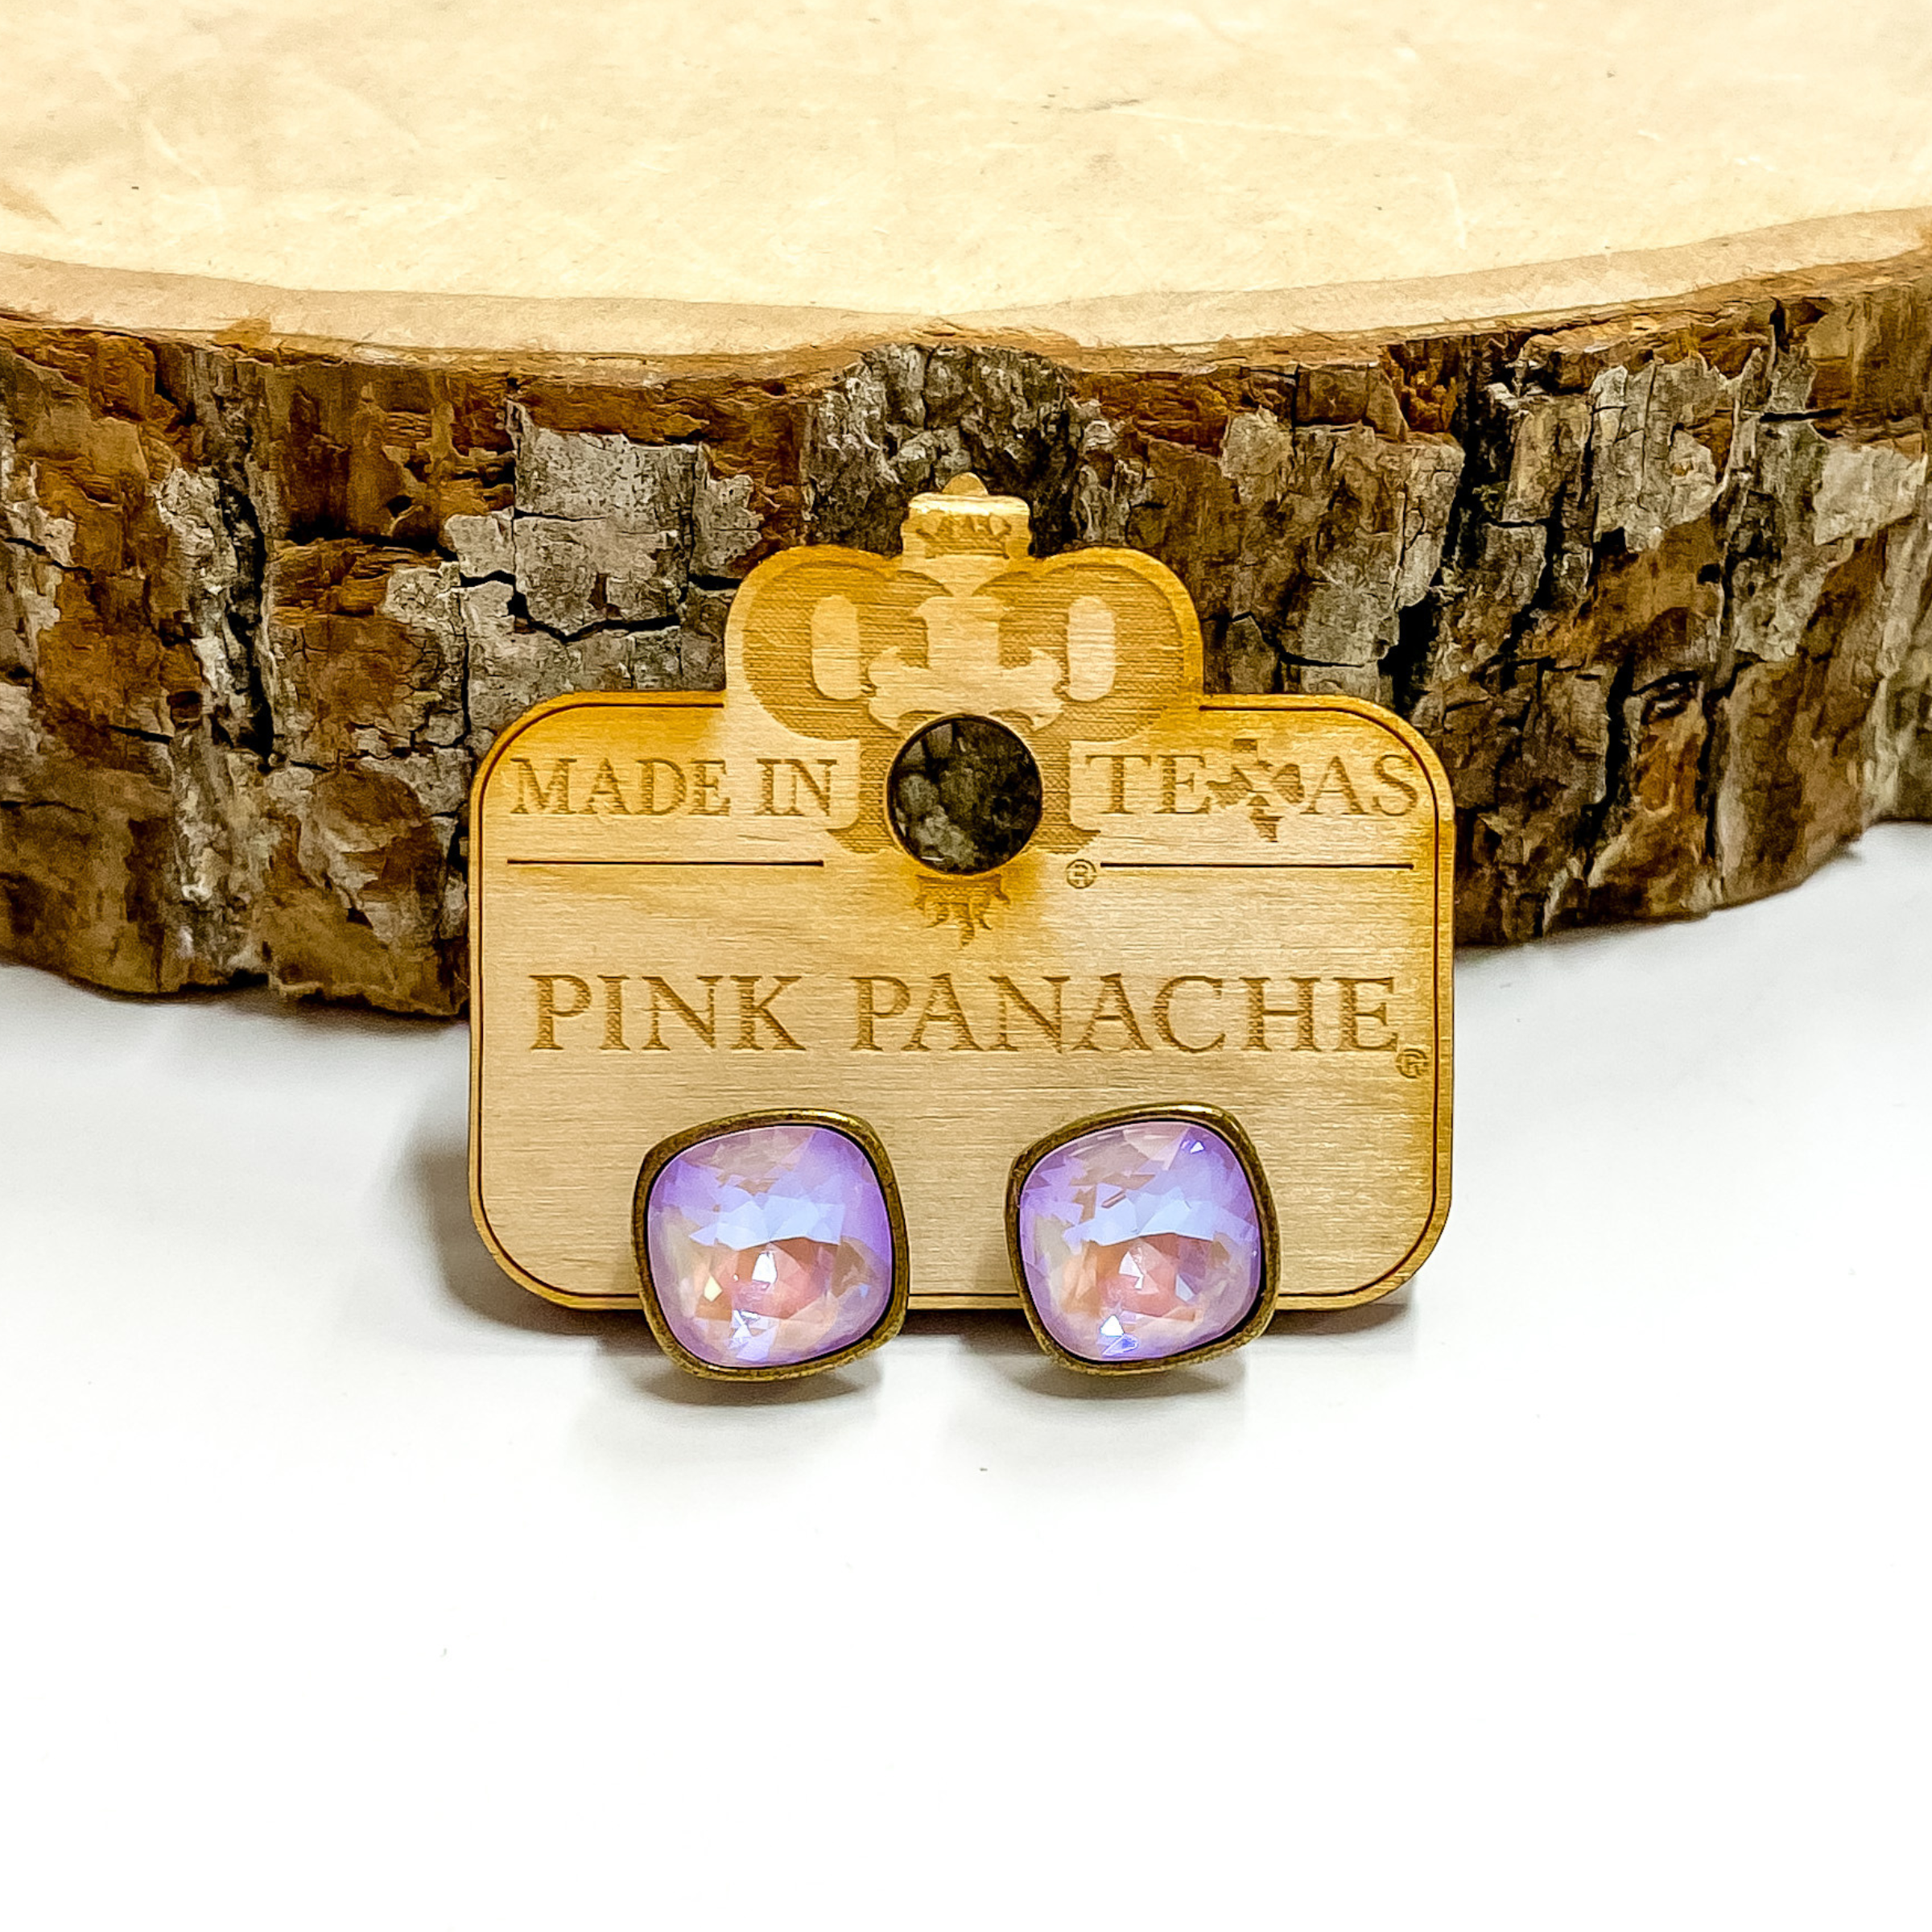 A pair of bronze, square stud earrings with lavender cushion cut crystals. These earring are pictured on a wood holder on a white background with a piece of wood in the background.